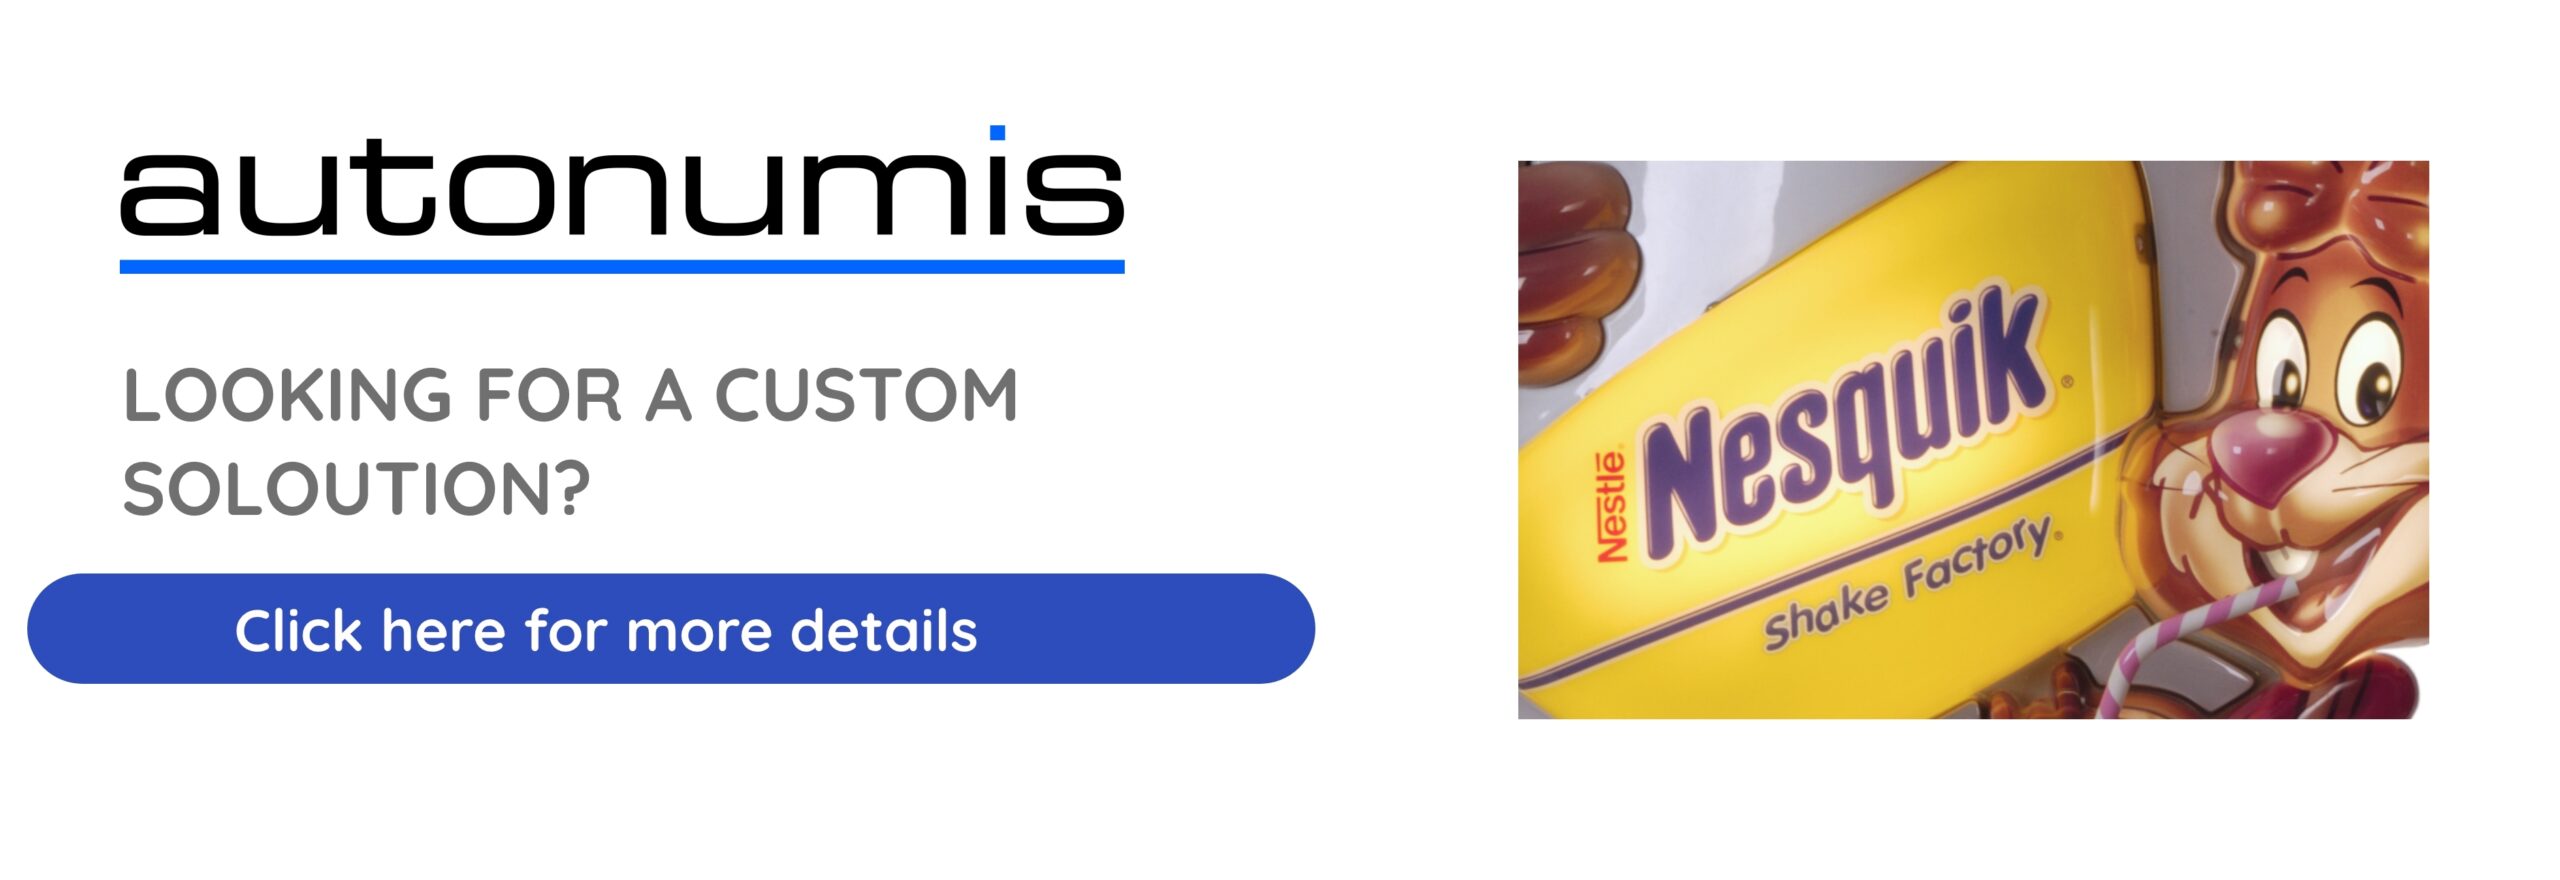 Customised Products by Autonumis